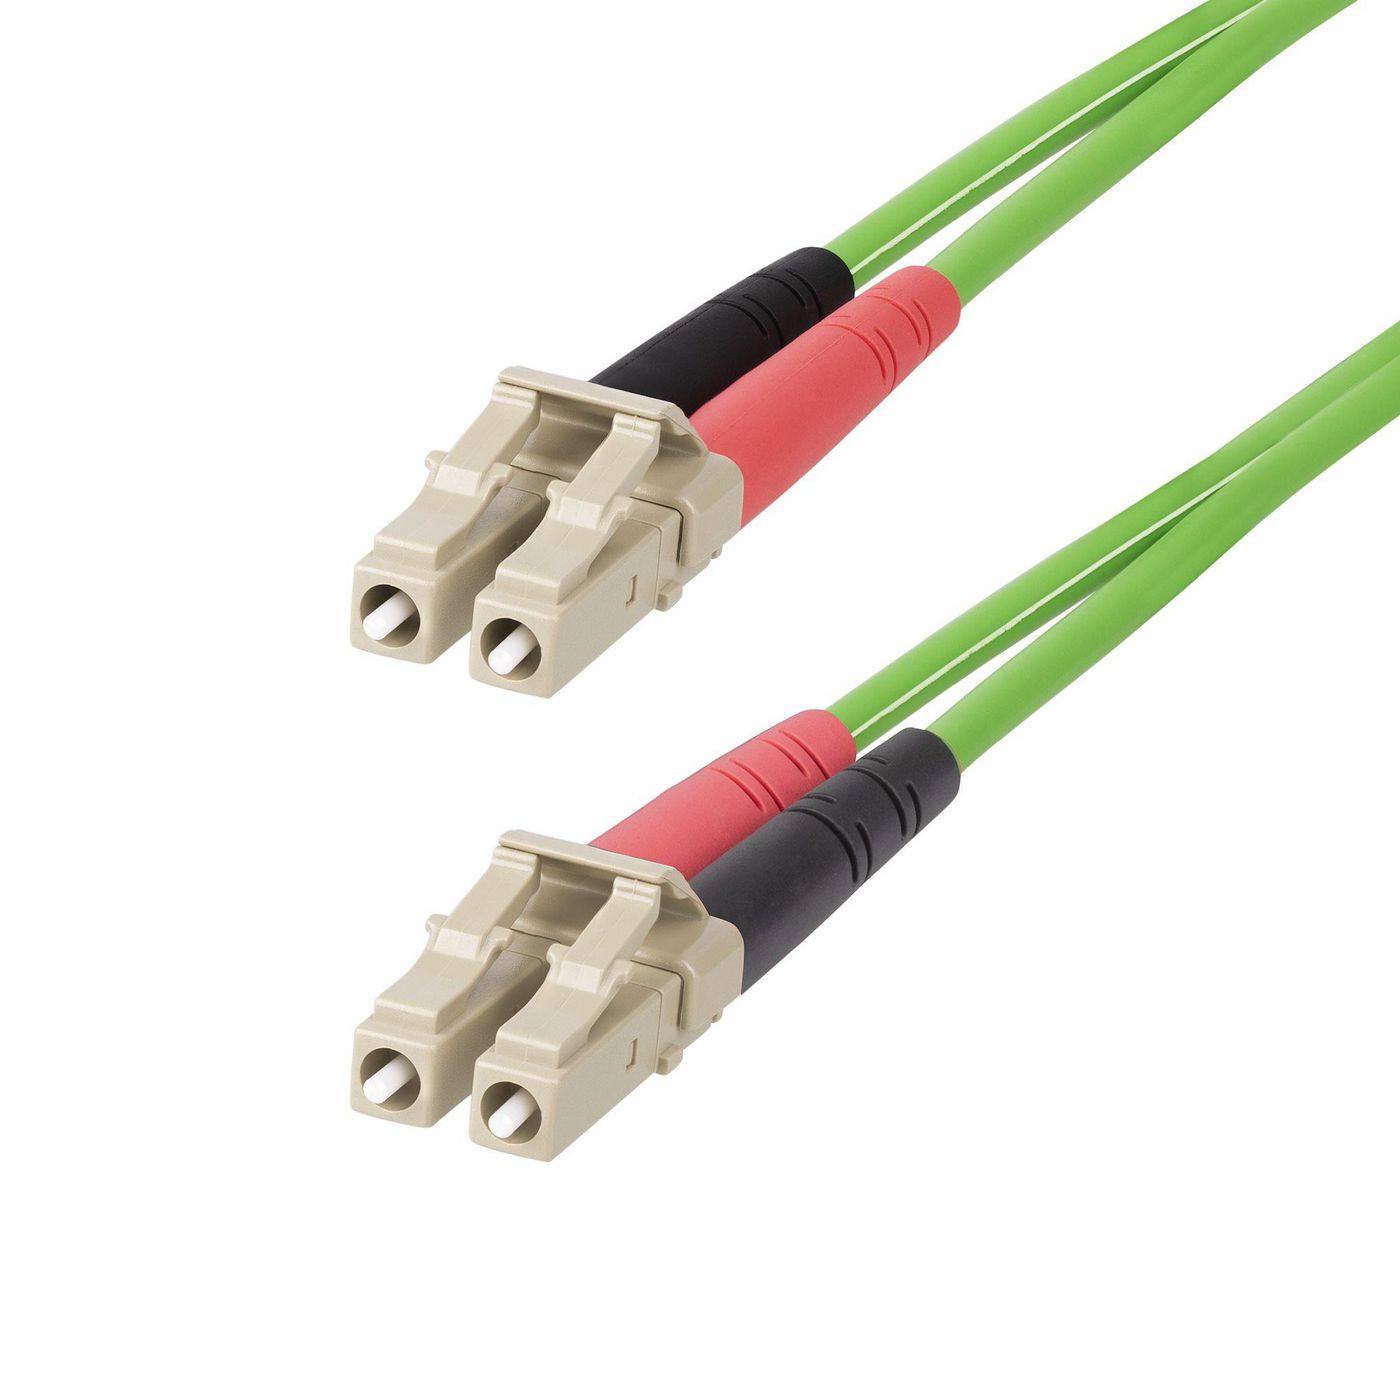 STARTECH.COM 1m (3ft) LC to LC (UPC) OM5 Multimode Fiber Optic Cable, 50/125µm Duplex LOMMF Zipcord,